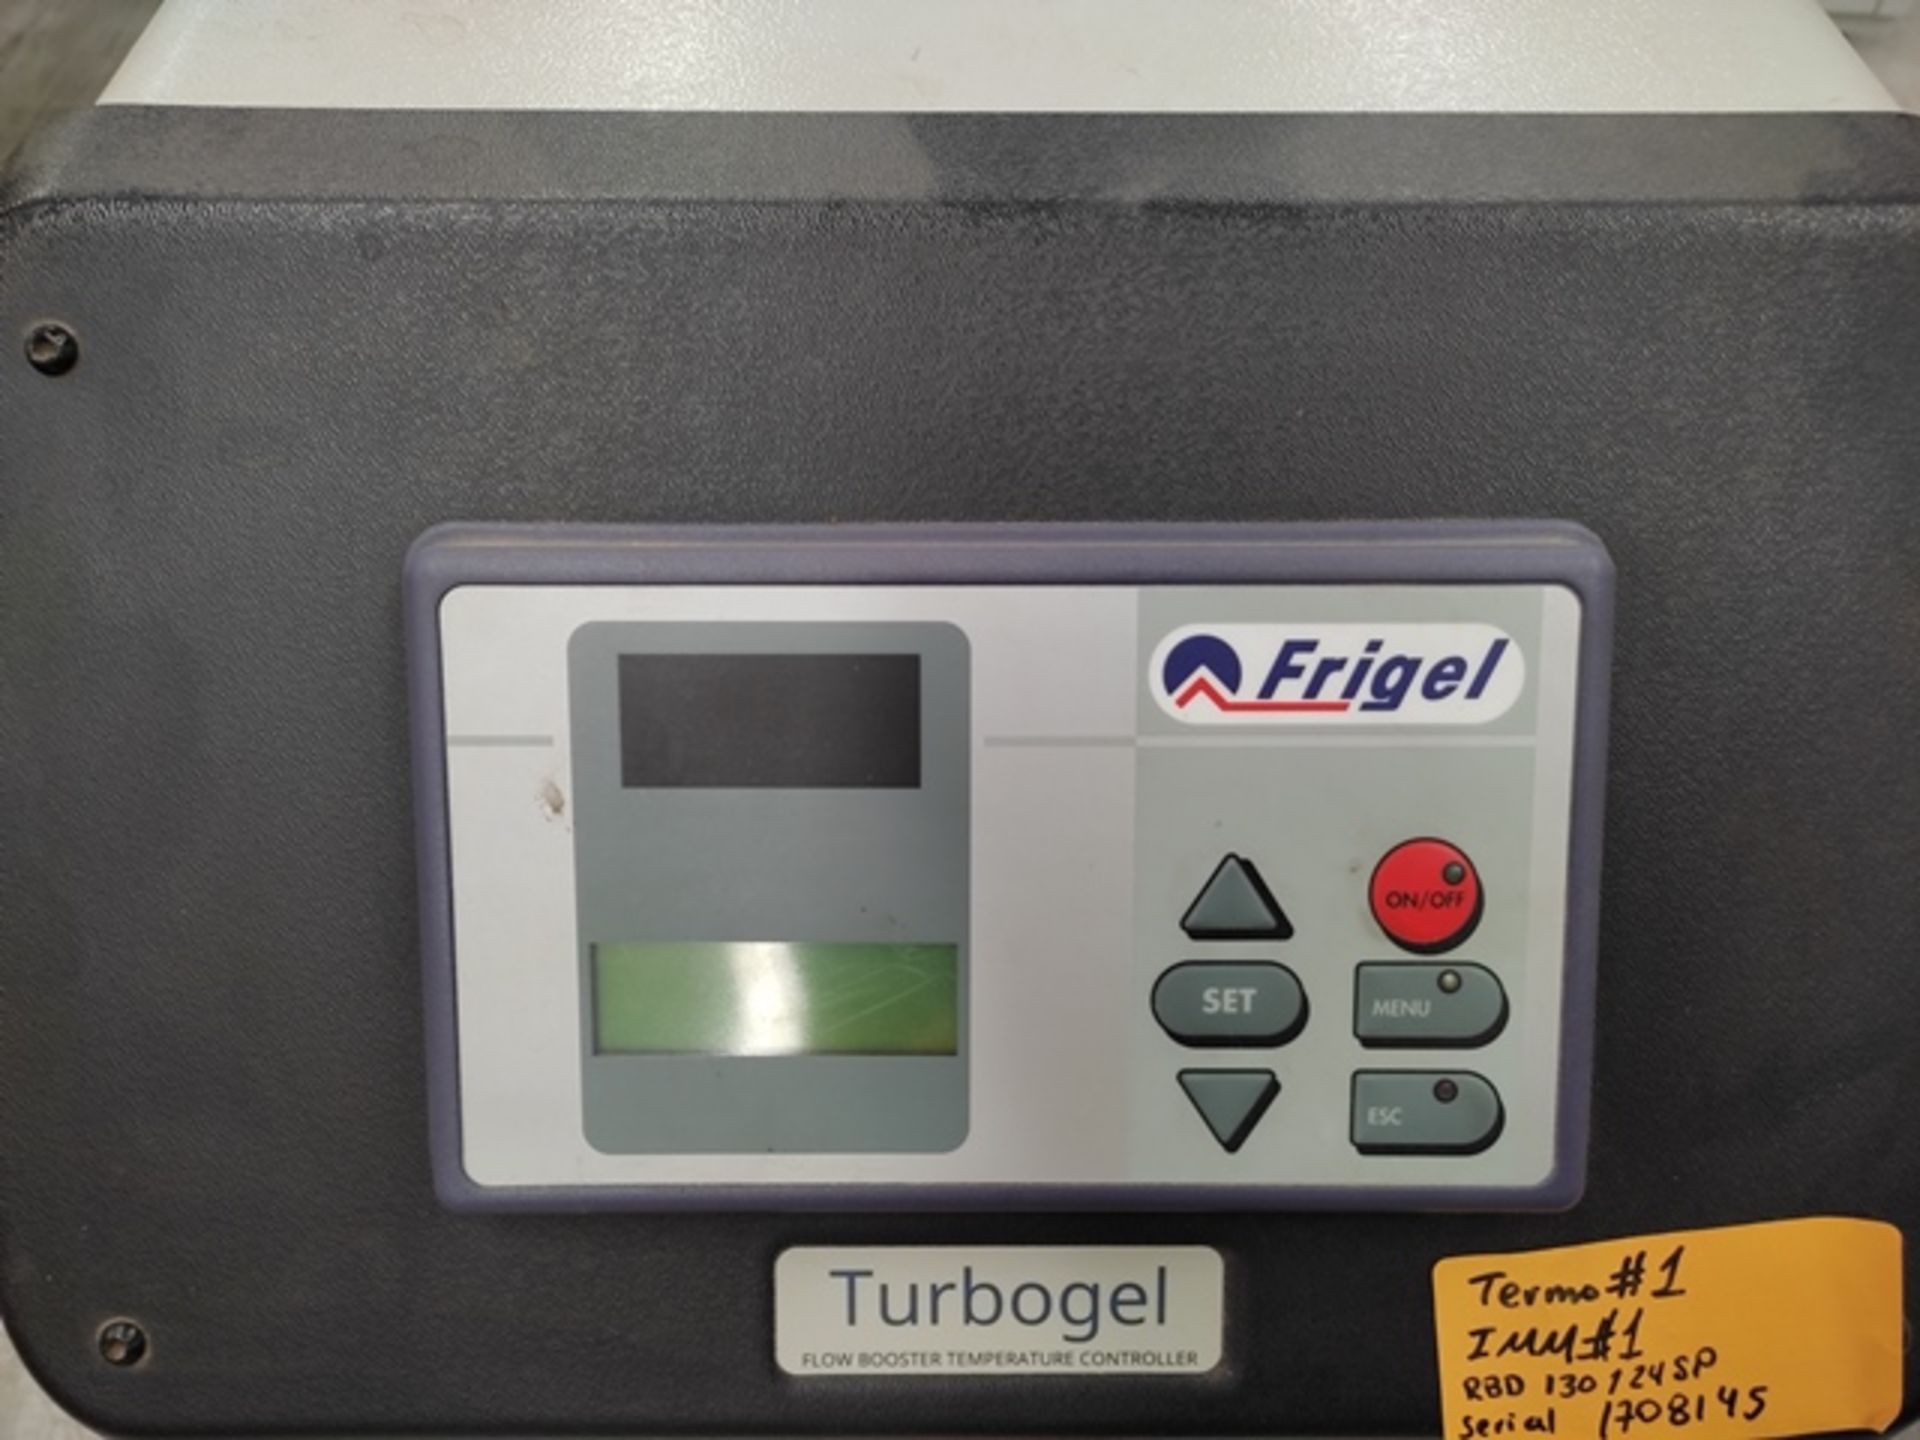 Lot of: (2) Frigel RBD130/24 SP 24 KW Flow Booster Temperature Controller, Mfg. Year: 2017 - Image 8 of 11